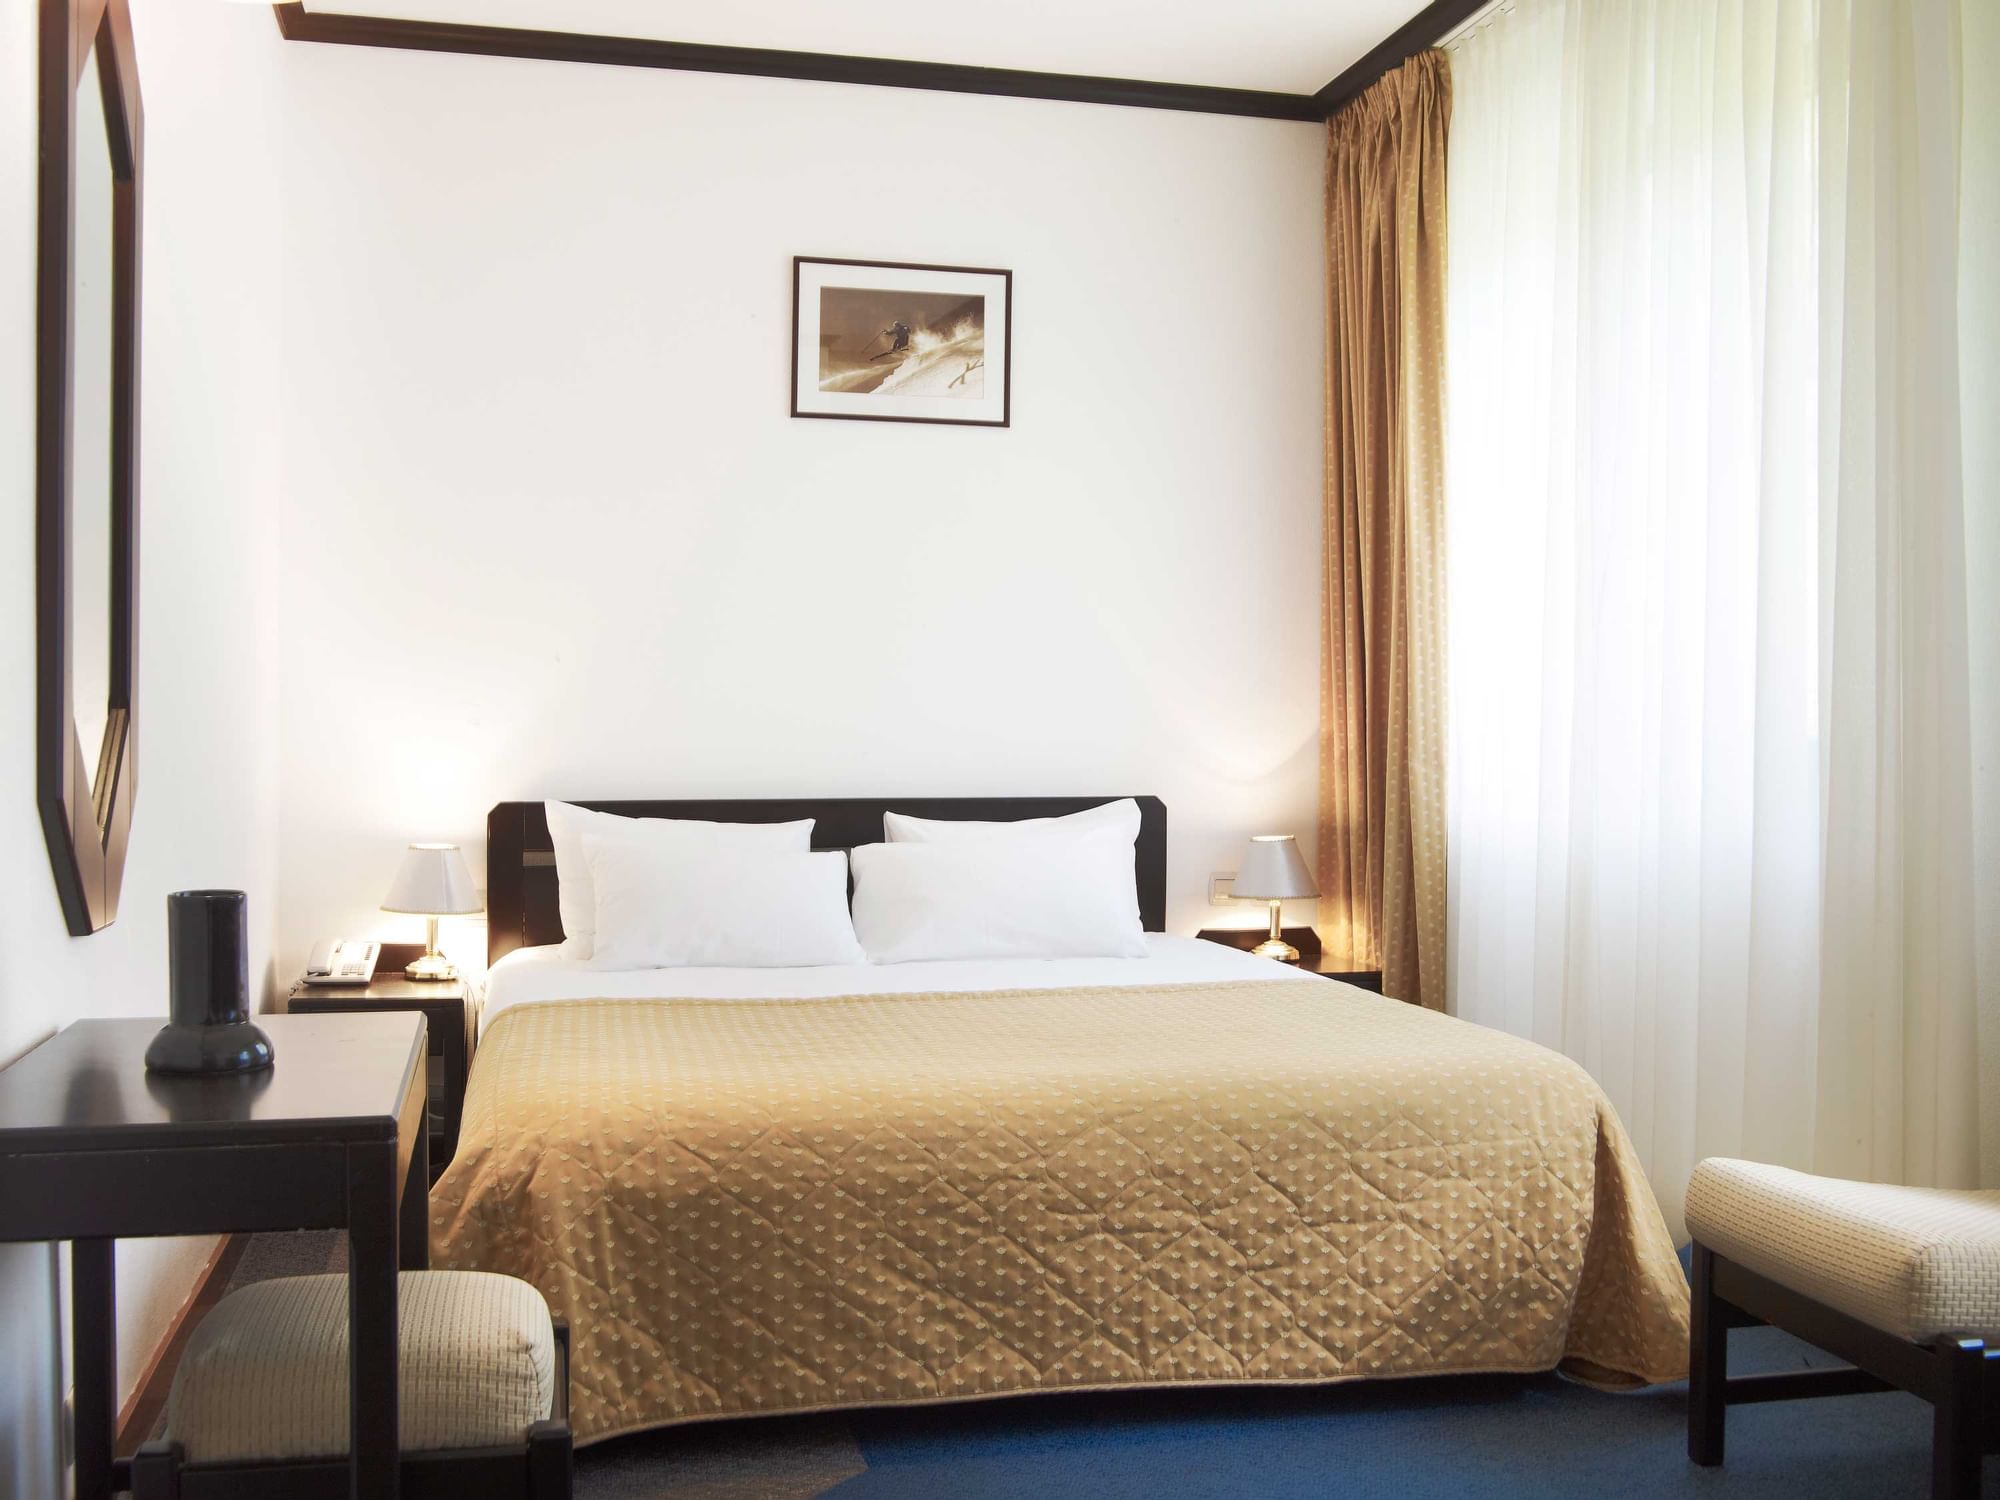 Queen Room with comfy bed & mirror at Ana Hotels Poiana